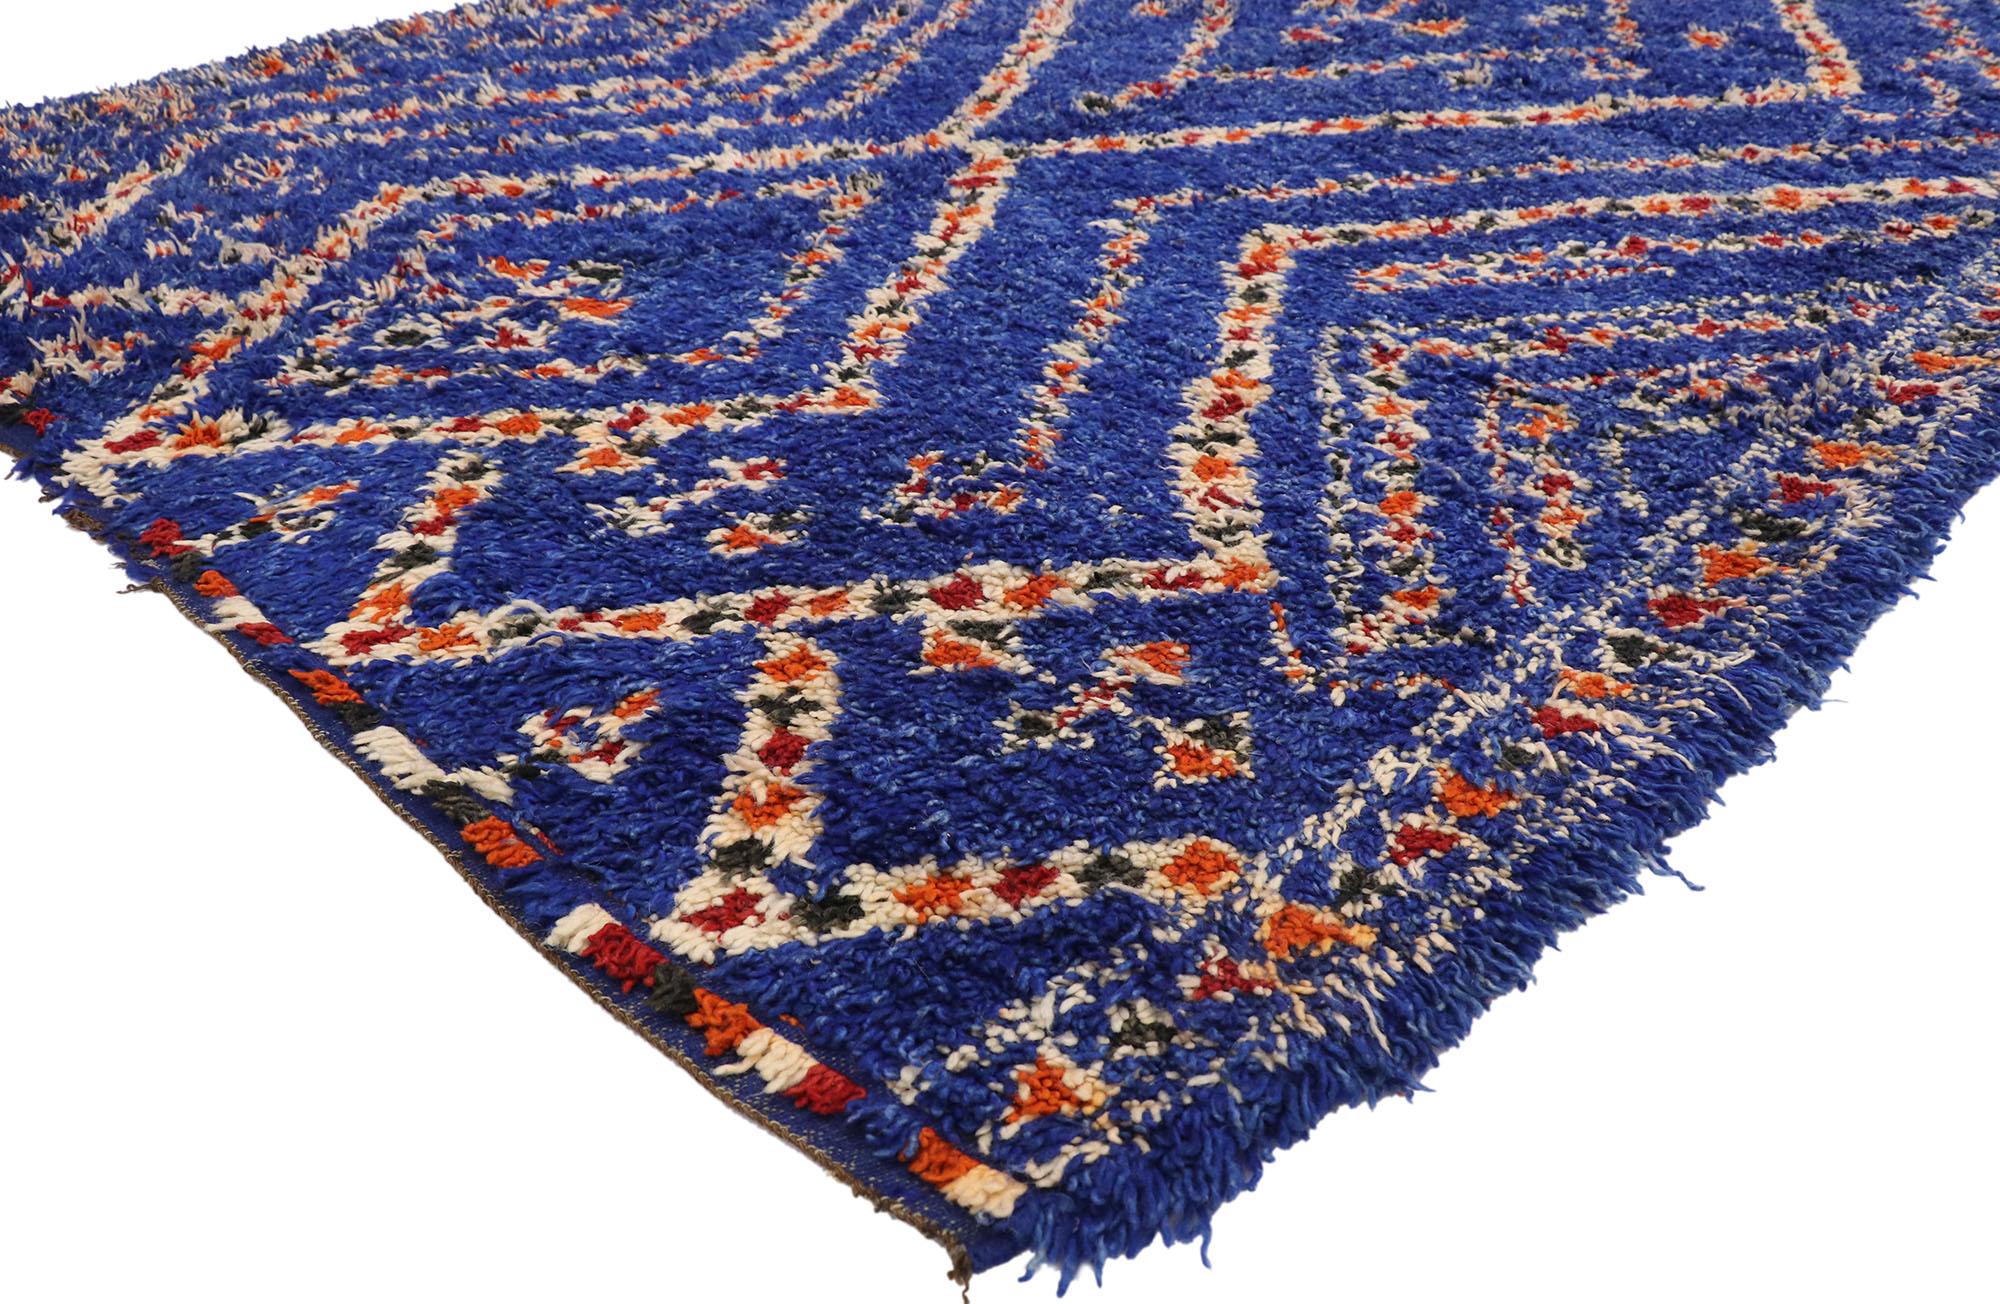 21016, vintage Indigo blue Beni M'Guild Moroccan rug with Modern Boho tribal style. This hand knotted wool vintage blue Beni M'Guild Moroccan rug features mirrored chevron lines united to form a vertical column of two lozenges with an open end